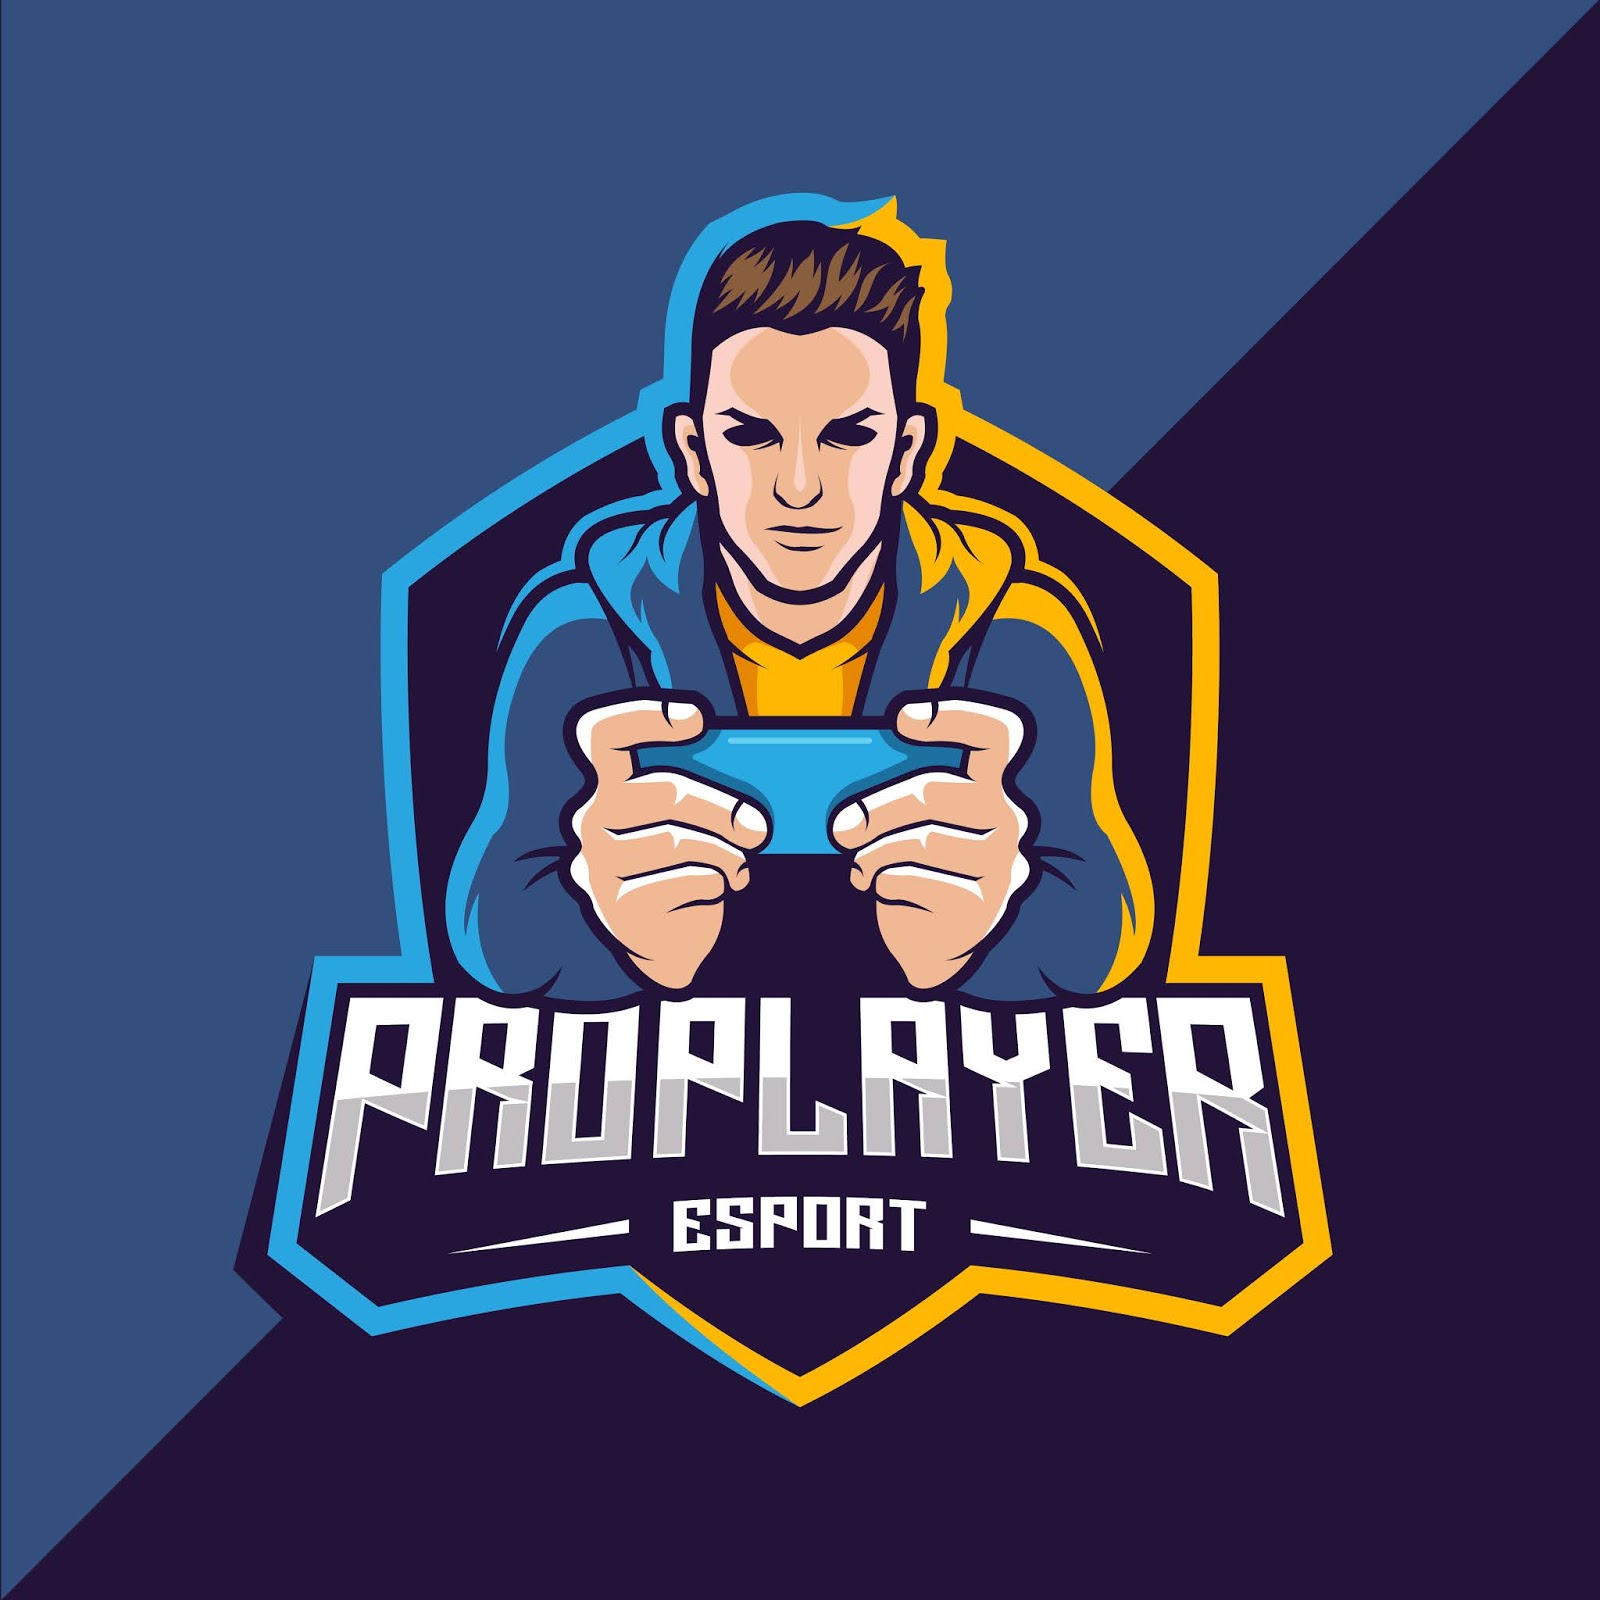 Pro Player Esport Game Free Download Vector CDR, AI, EPS and PNG Formats